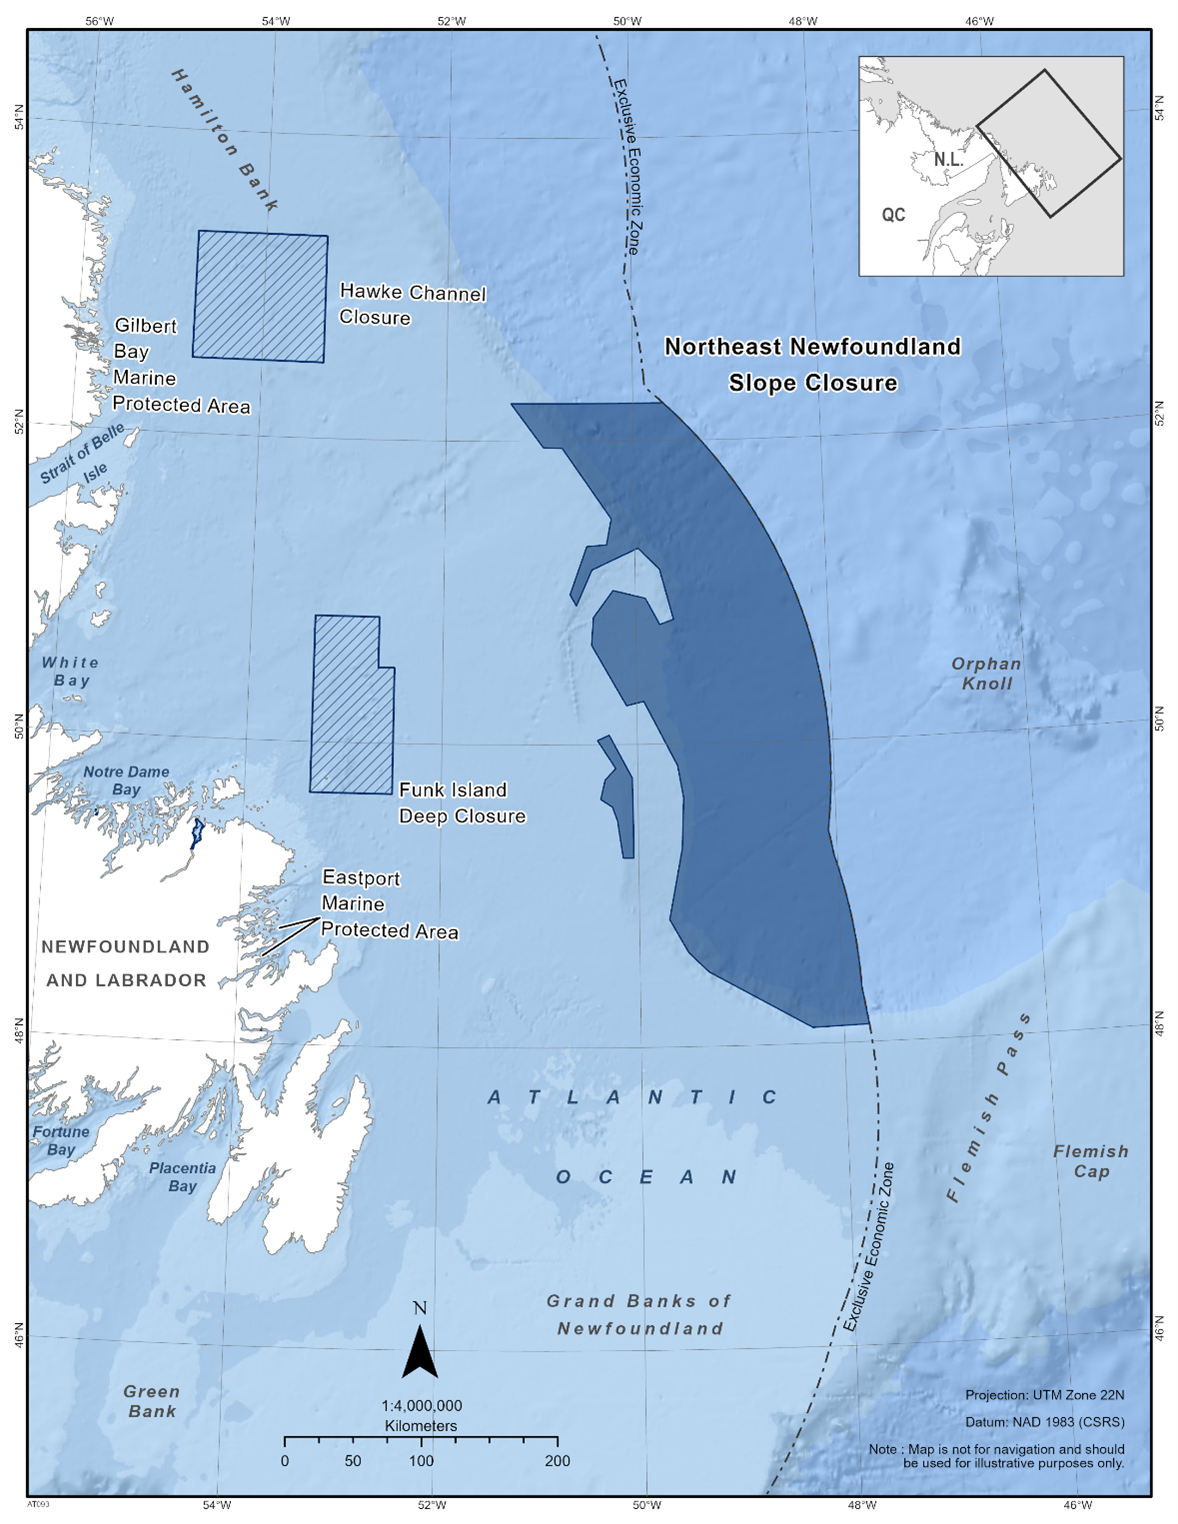 Map of the Northeast Newfoundland Slope Closure in dark blue. The map also features other marine refuges nearby with dark blue diagonal lines (Hawke Channel Closure & Funk Island Deep Closure).